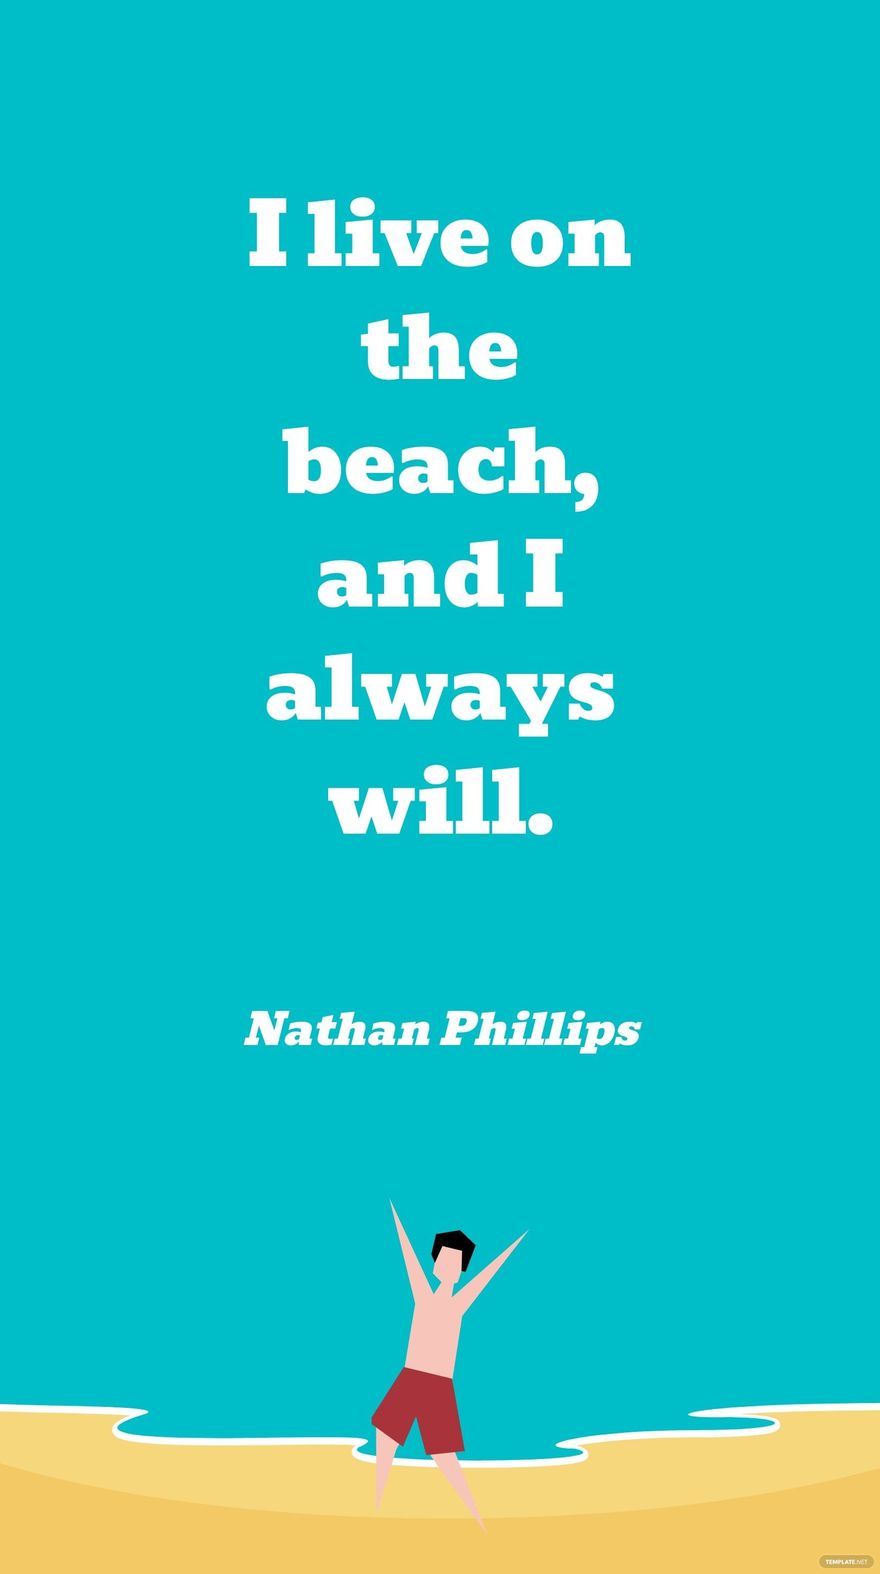 Nathan Phillips - I live on the beach, and I always will. in JPG